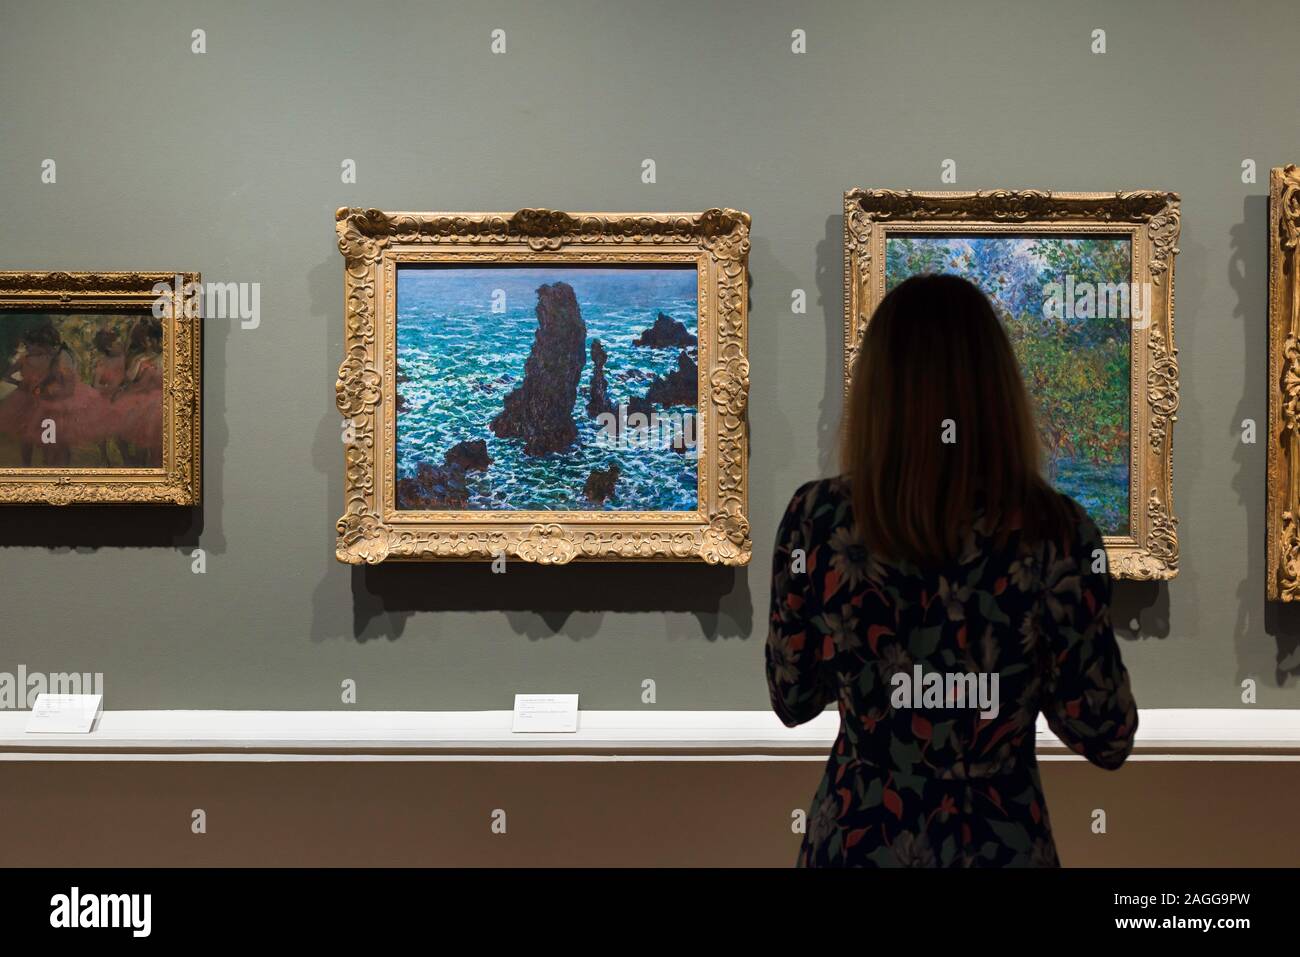 Woman gallery, rear view of a woman looking at  Les Pyramides At Port-Coton (1886) by Claude Monet, Ny Carlsberg Glyptotek museum, Copenhagen Denmark Stock Photo